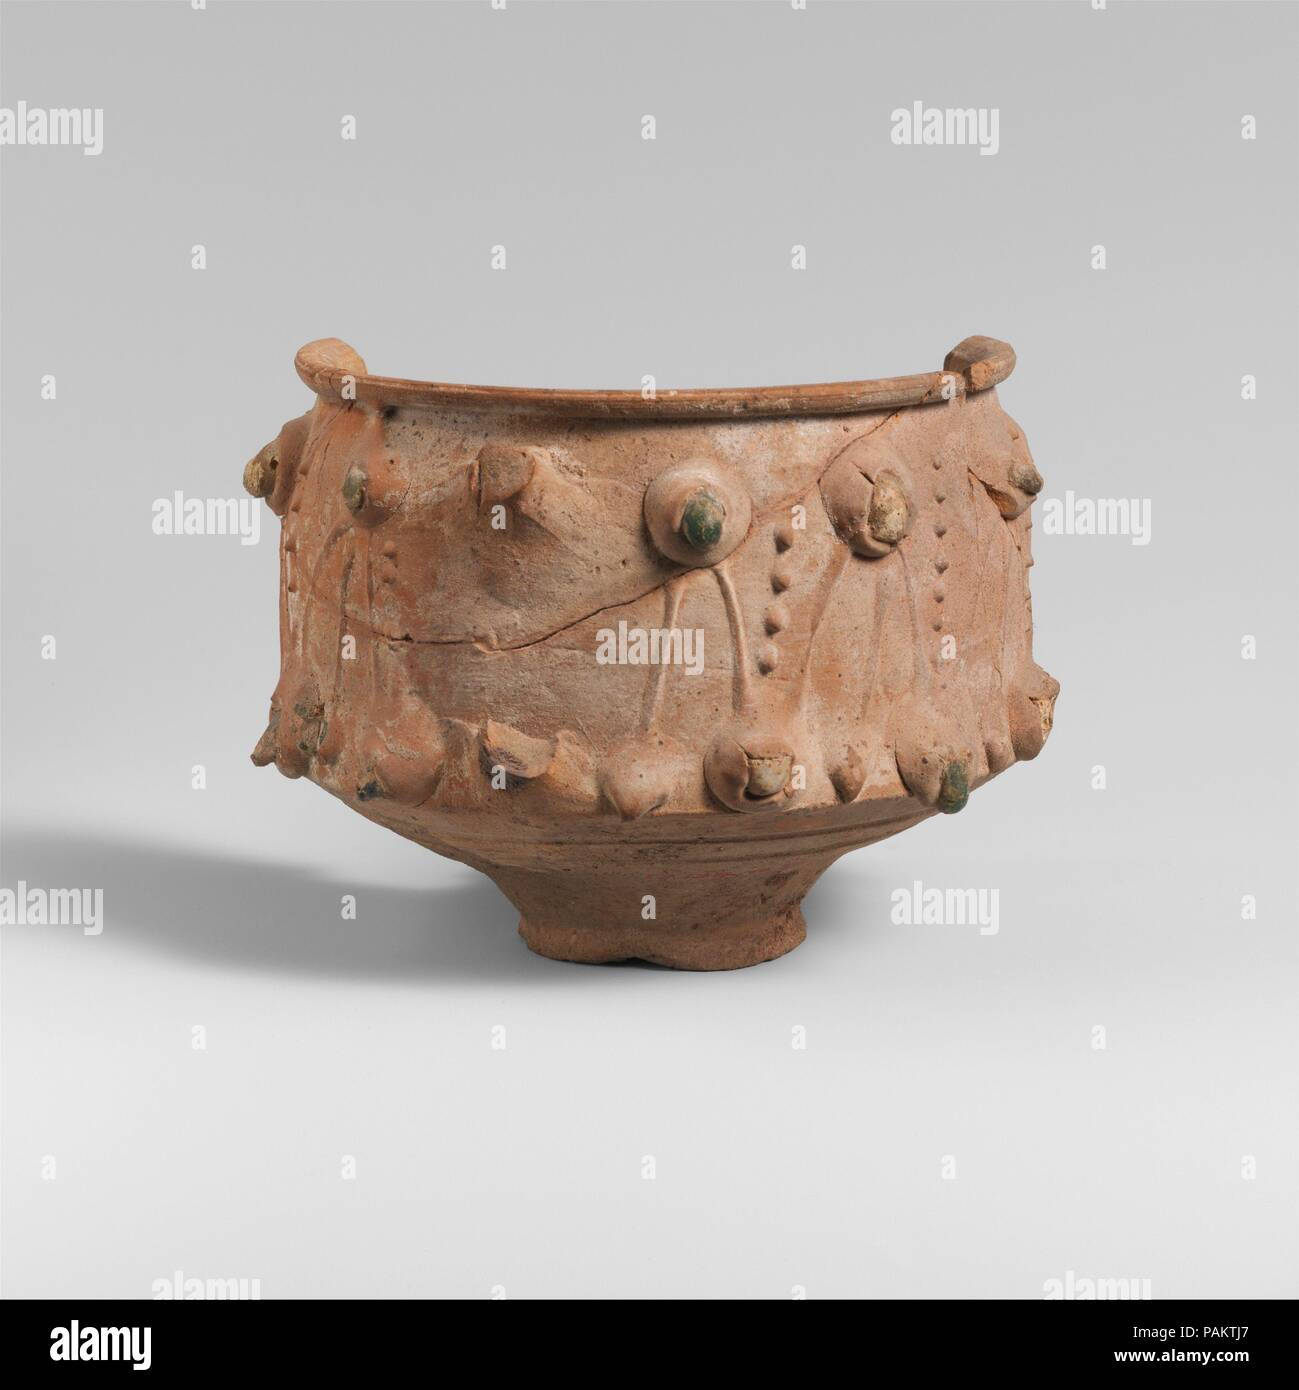 Fragmentary terracotta cup. Culture: Roman. Dimensions: H.  8.31 cm.. Date: 2nd century A.D..  On the sides of the cup is barbotine decoration inset with small chunks of colored glass. Museum: Metropolitan Museum of Art, New York, USA. Stock Photo